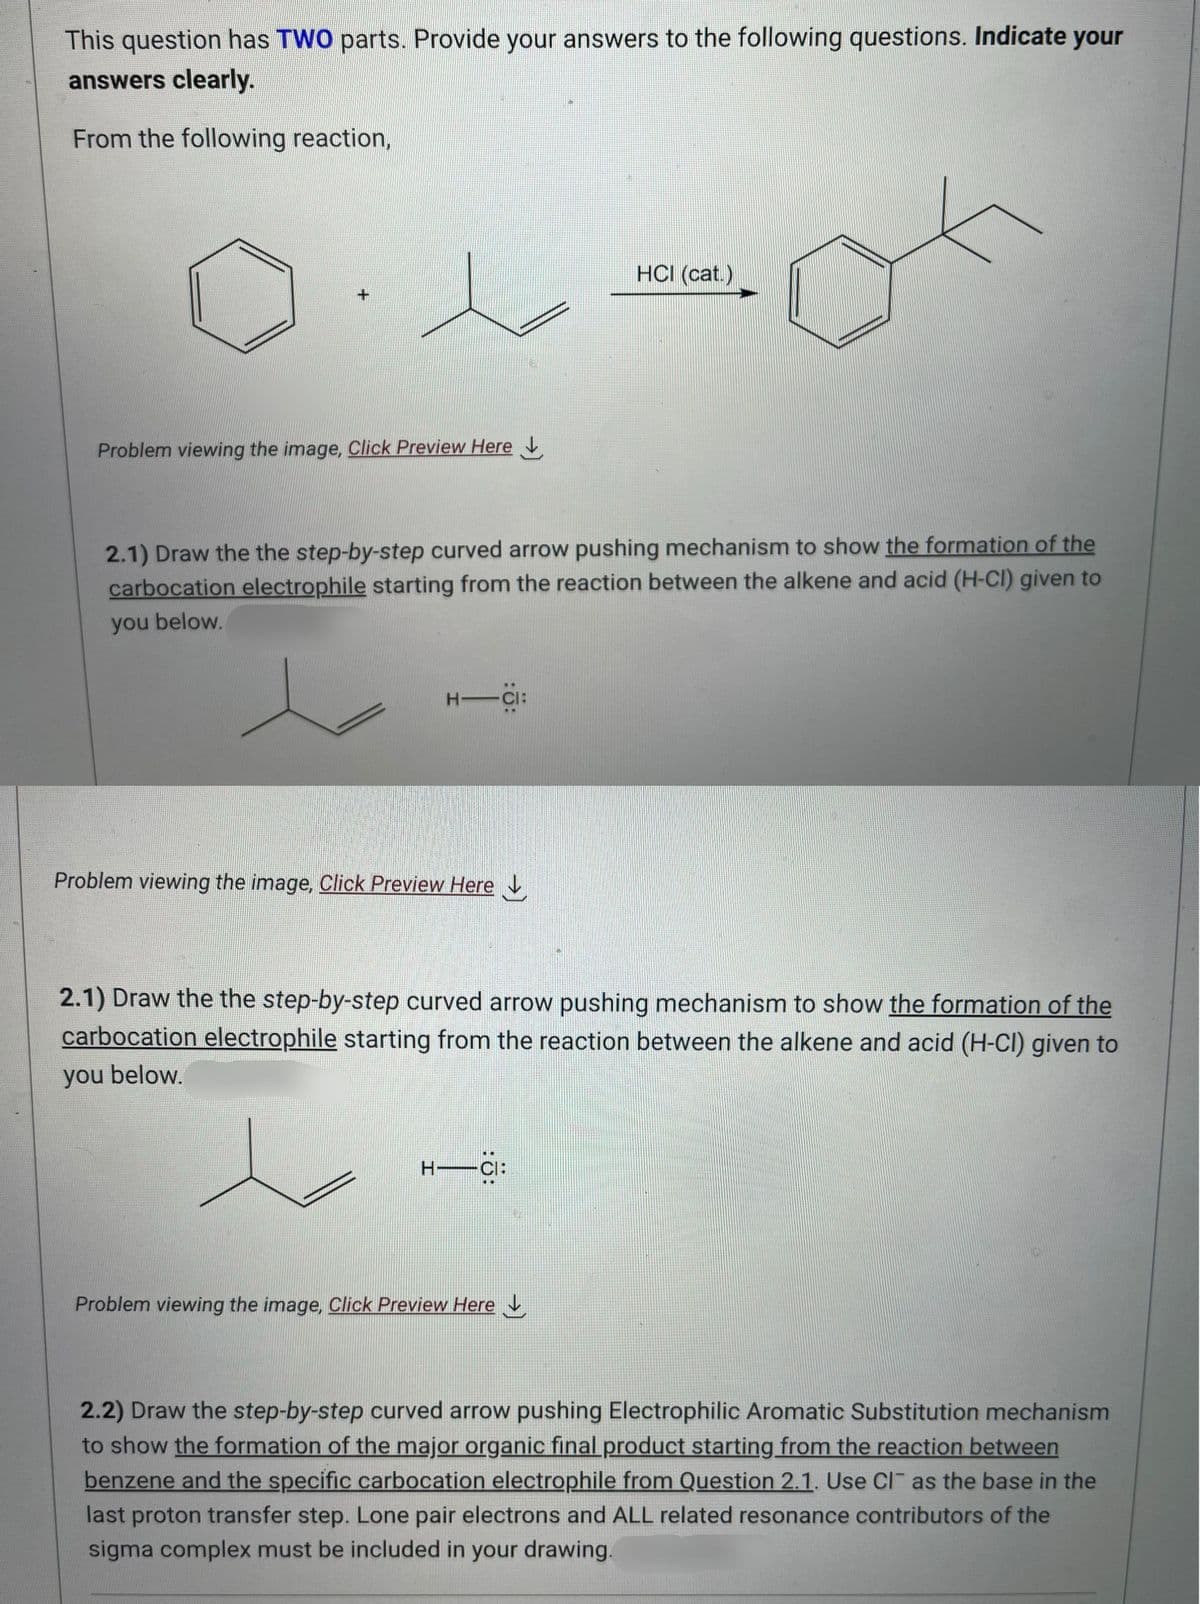 This question has TWO parts. Provide your answers to the following questions. Indicate your
answers clearly.
From the following reaction,
+
Problem viewing the image. Click Preview Here
2.1) Draw the the step-by-step curved arrow pushing mechanism to show the formation of the
carbocation electrophile starting from the reaction between the alkene and acid (H-CI) given to
you below.
H―CI:
Problem viewing the image. Click Preview Here
HCI (cat.)
2.1) Draw the the step-by-step curved arrow pushing mechanism to show the formation of the
carbocation electrophile starting from the reaction between the alkene and acid (H-CI) given to
you below.
H-CI:
Problem viewing the image. Click Preview Here
2.2) Draw the step-by-step curved arrow pushing Electrophilic Aromatic Substitution mechanism
to show the formation of the major organic final product starting from the reaction between
benzene and the specific carbocation electrophile from Question 2.1. Use Cl as the base in the
last proton transfer step. Lone pair electrons and ALL related resonance contributors of the
sigma complex must be included in your drawing.